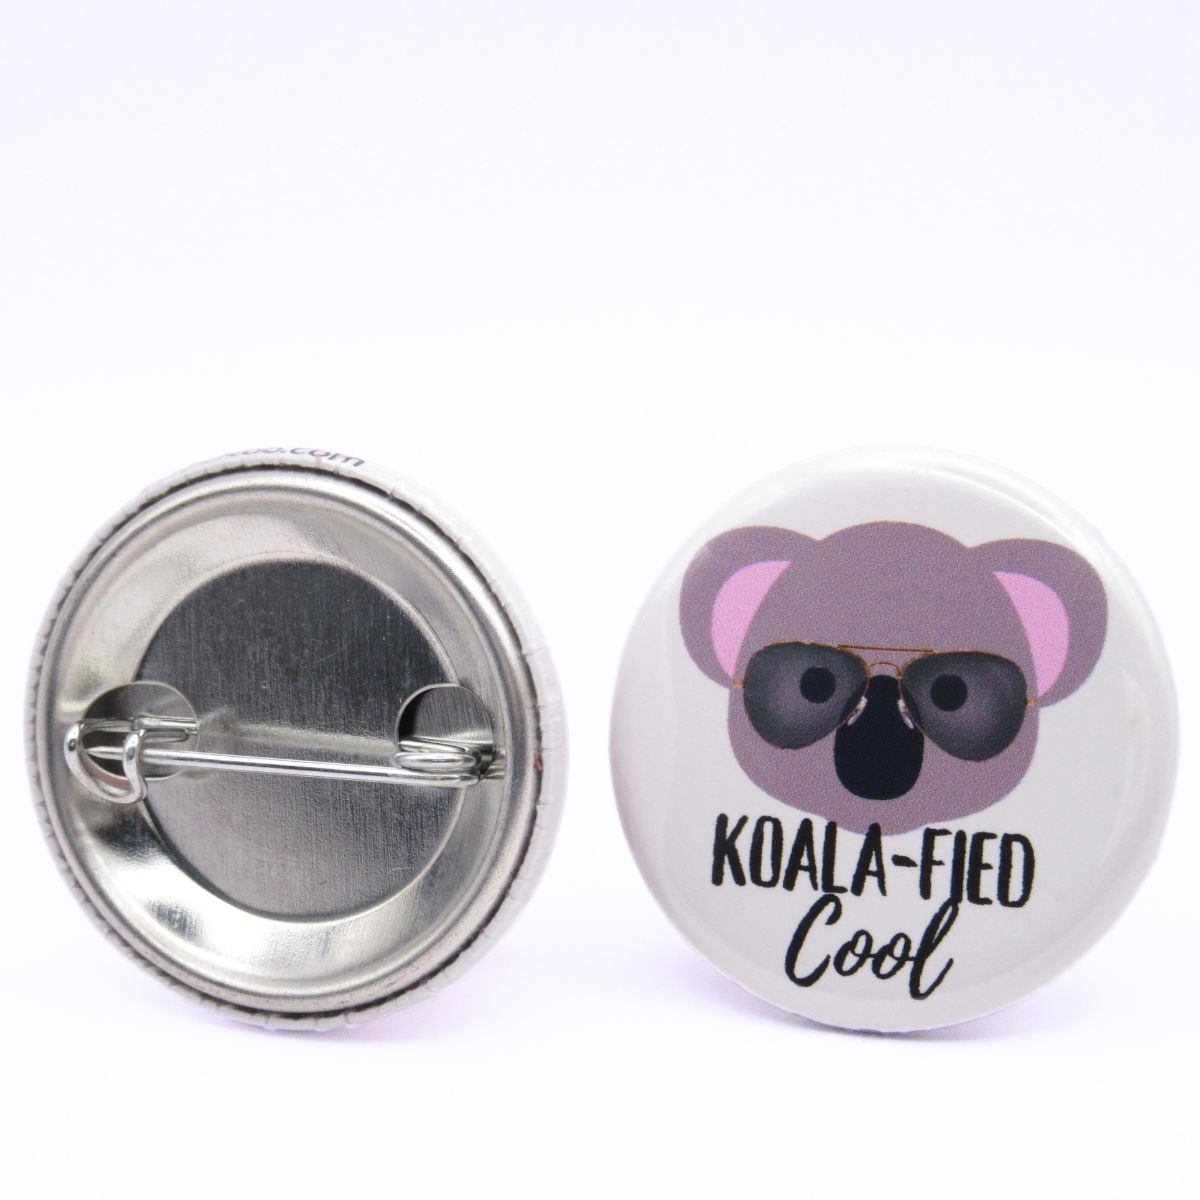 BooBooRoo Pinback Button (i.e. button, badge, pin) of the face of a koala wearing wayfarer sunglasses with the saying, "Koala-fied cool." Image showing front and back of high-quality metal button.